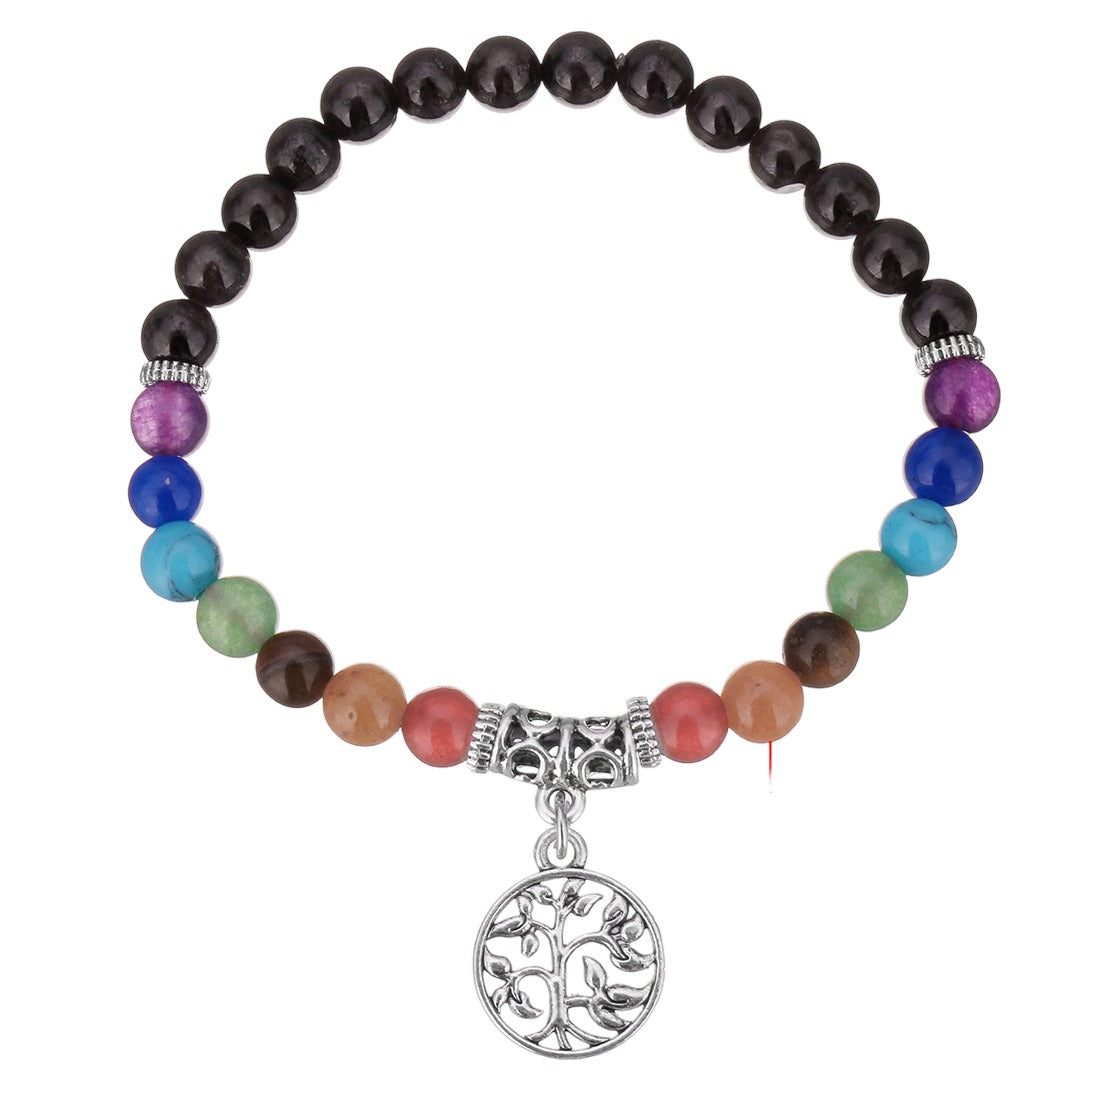 Black Agate Chakra Bracelet with Tree of Life Charm - 6mm - NEW523